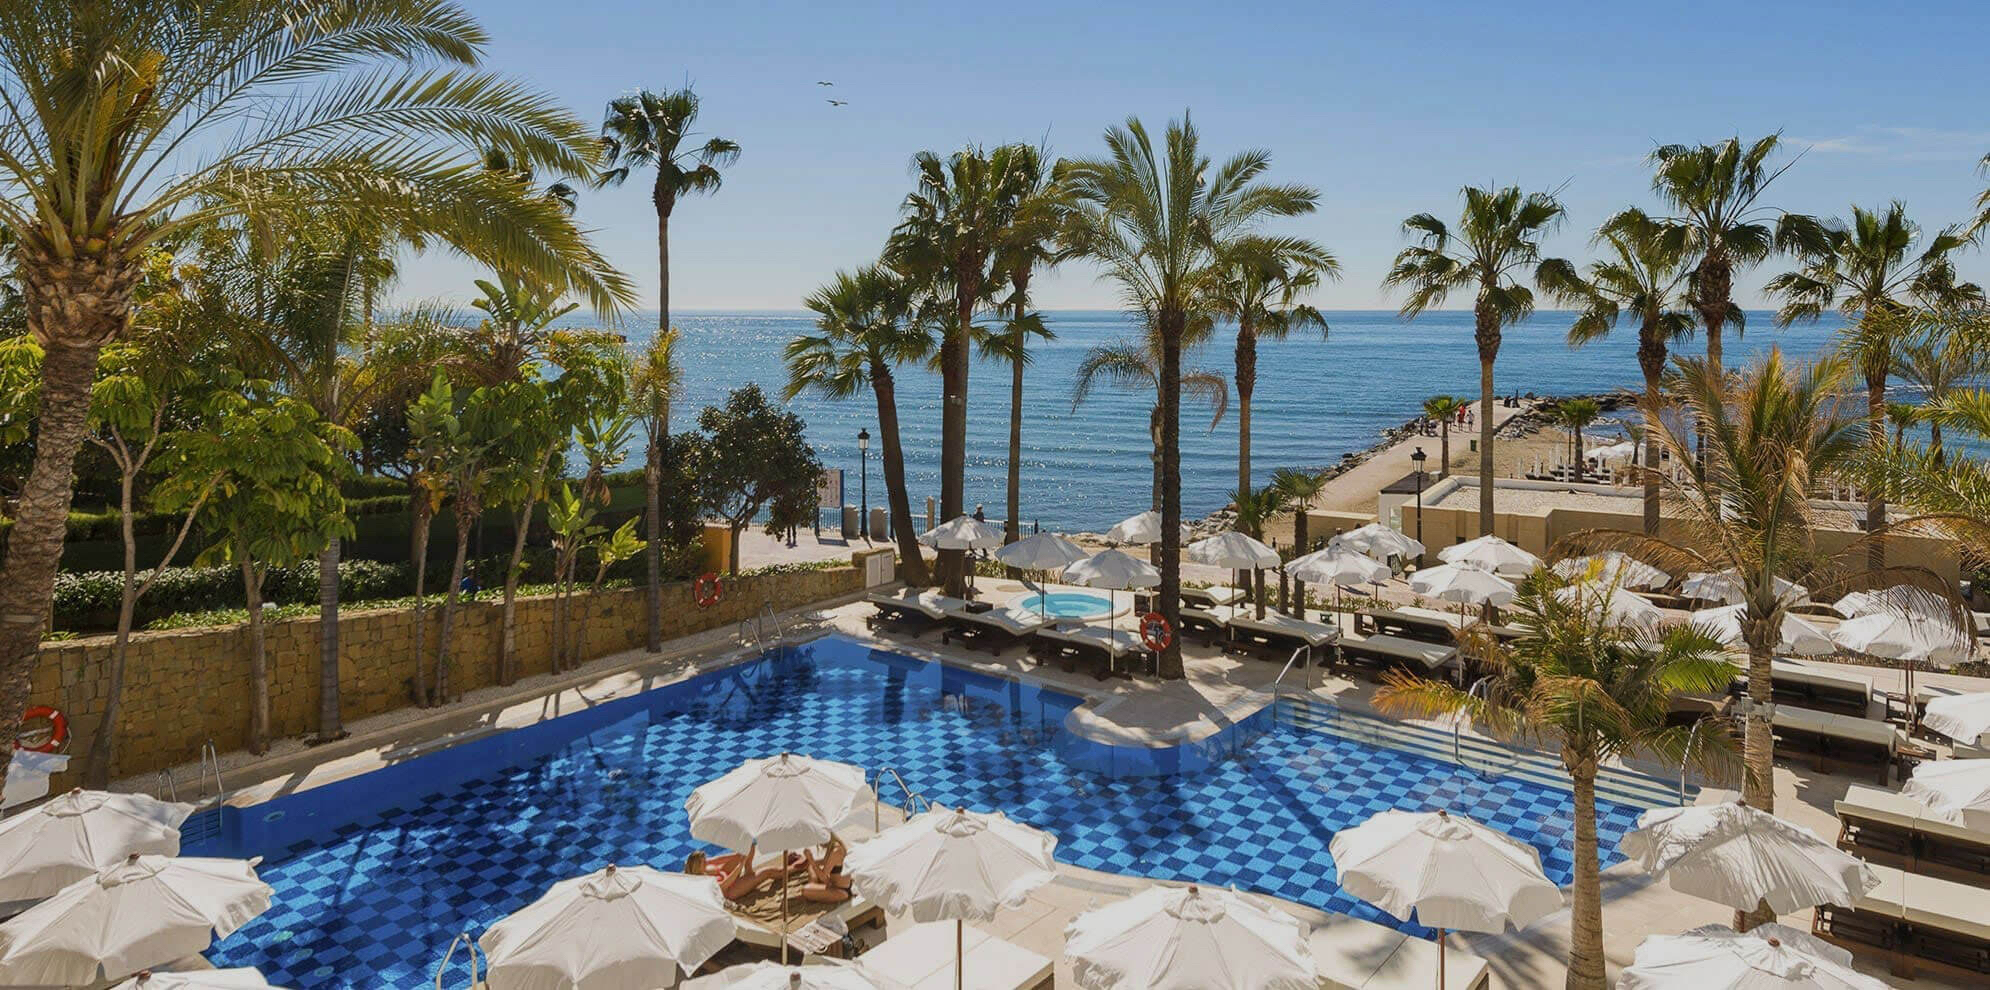 COSTA DEL SOL - AMARE BEACH ADULT ONLY 4*